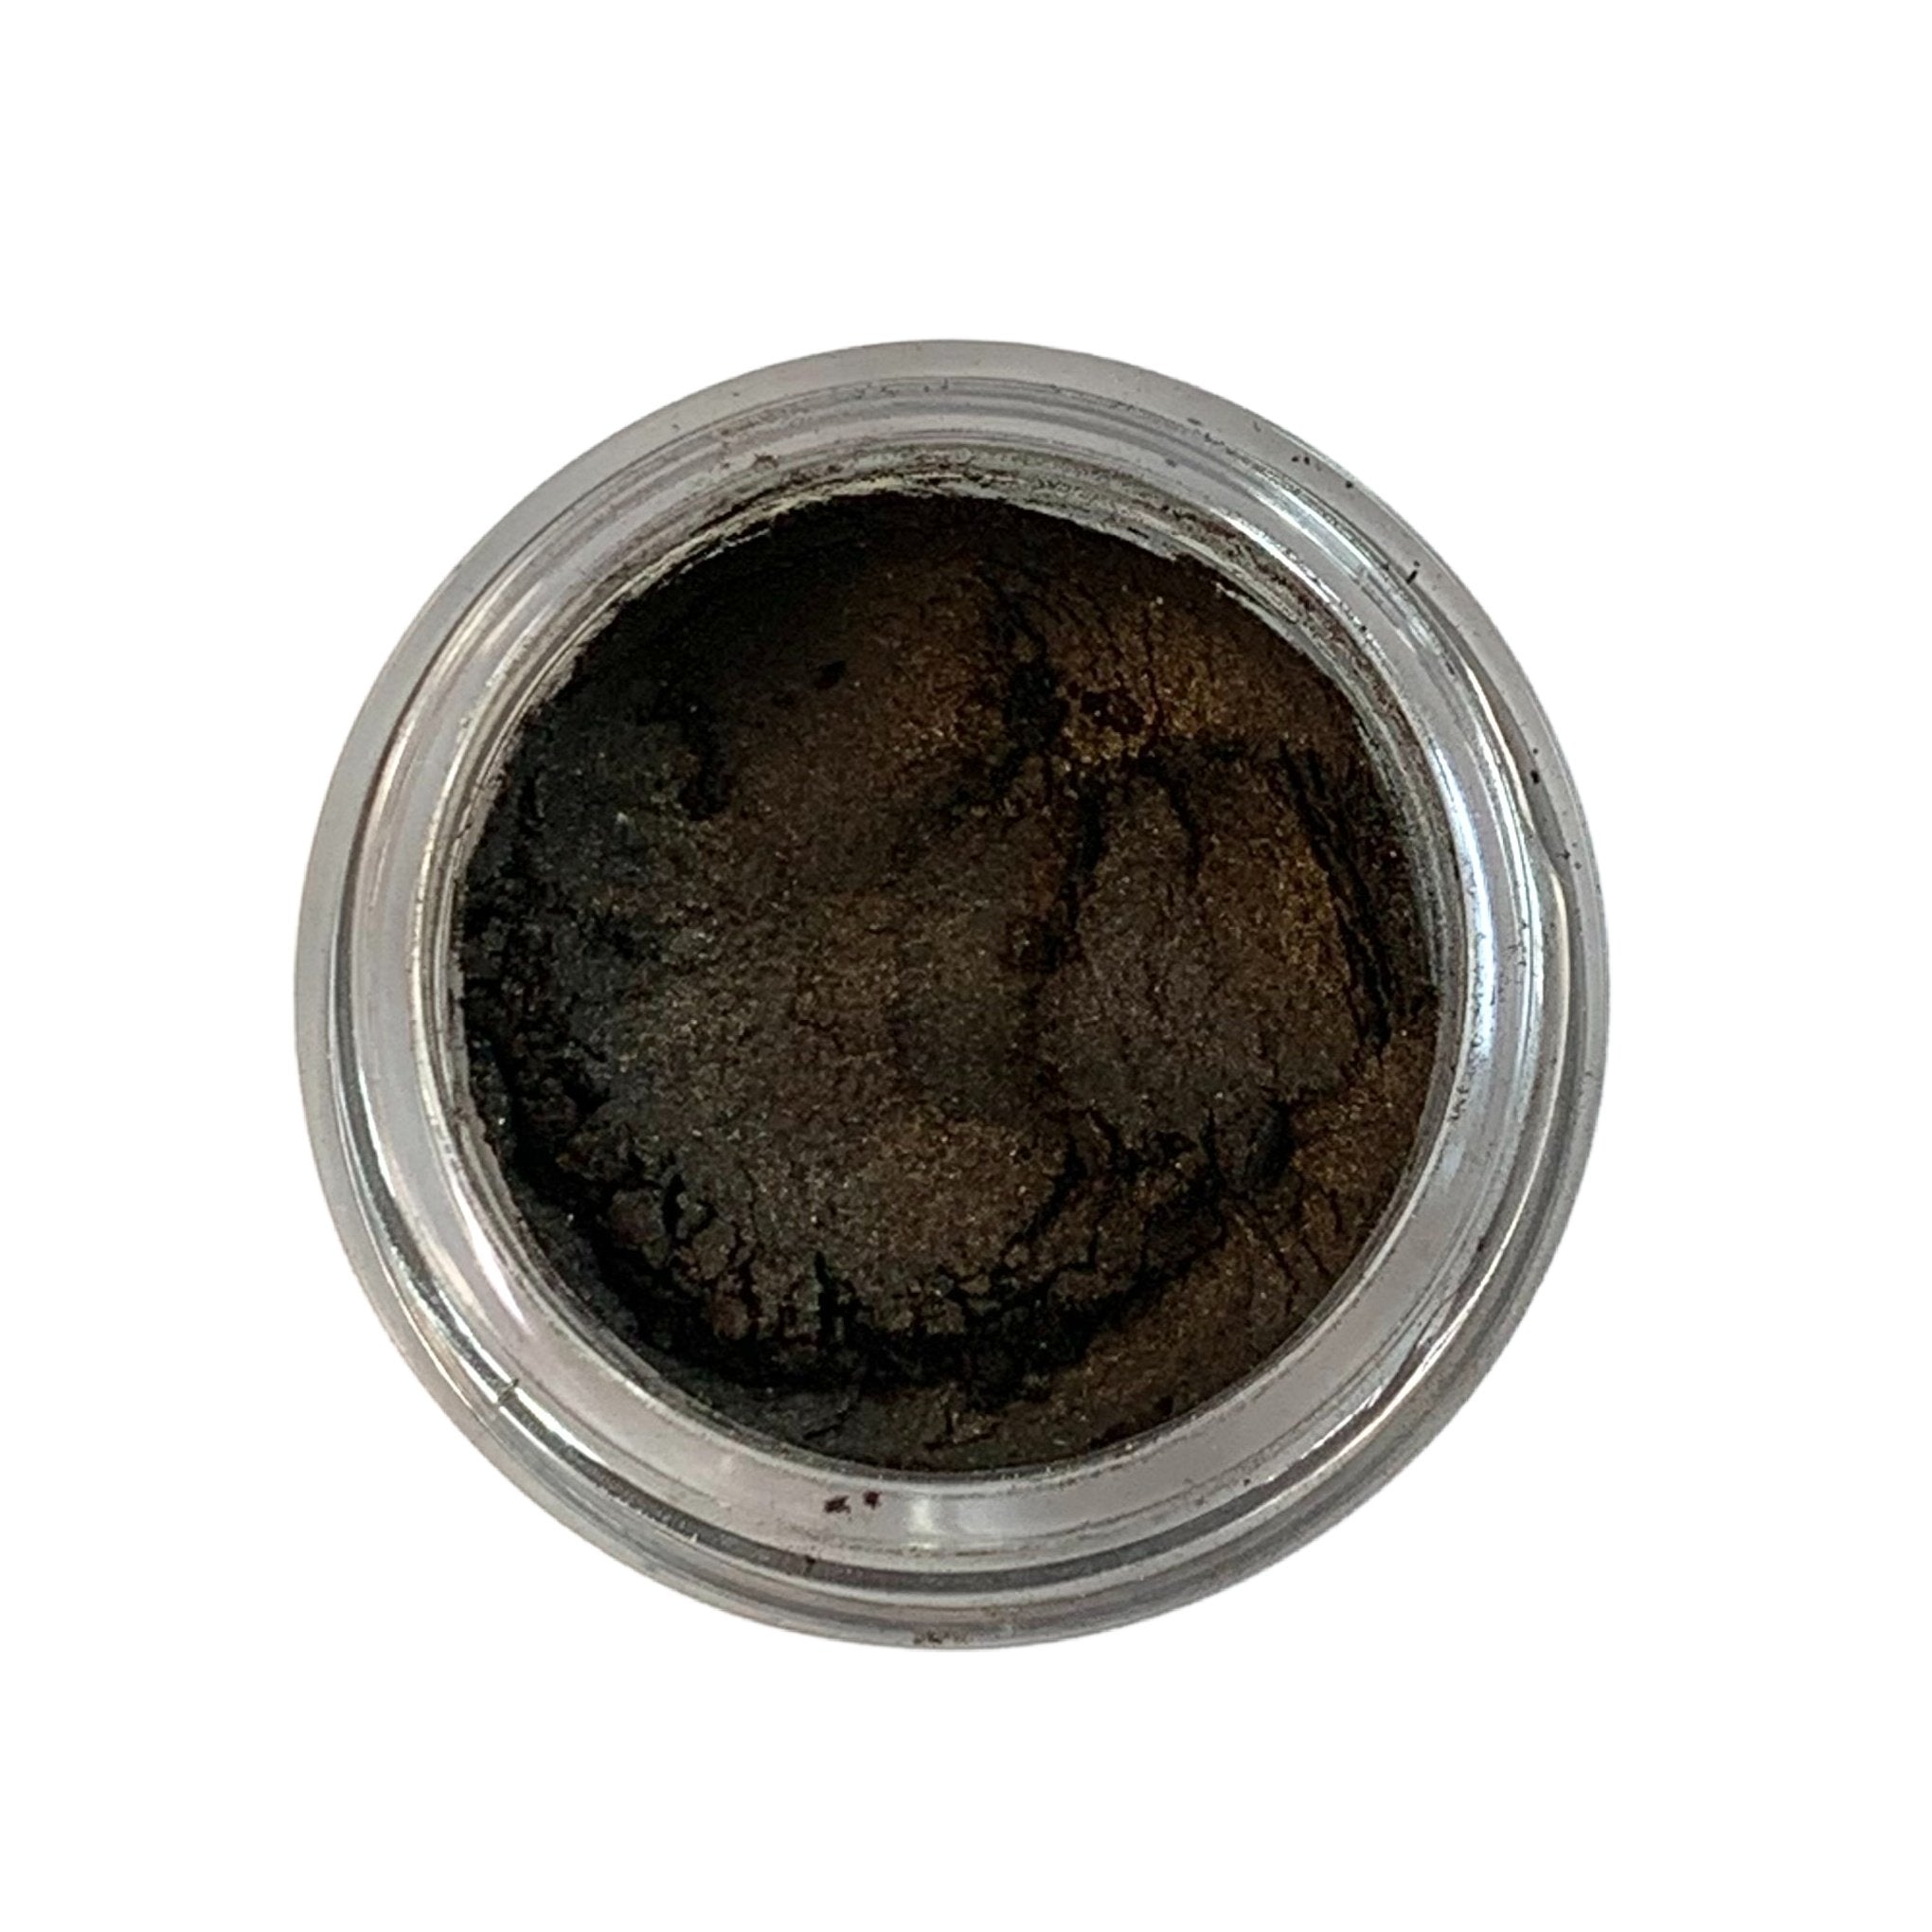 bittersweet loose mineral eyeshadow in a dark rich brown shade. comes in a 10gram sifter jar, vegan and cruelty free.